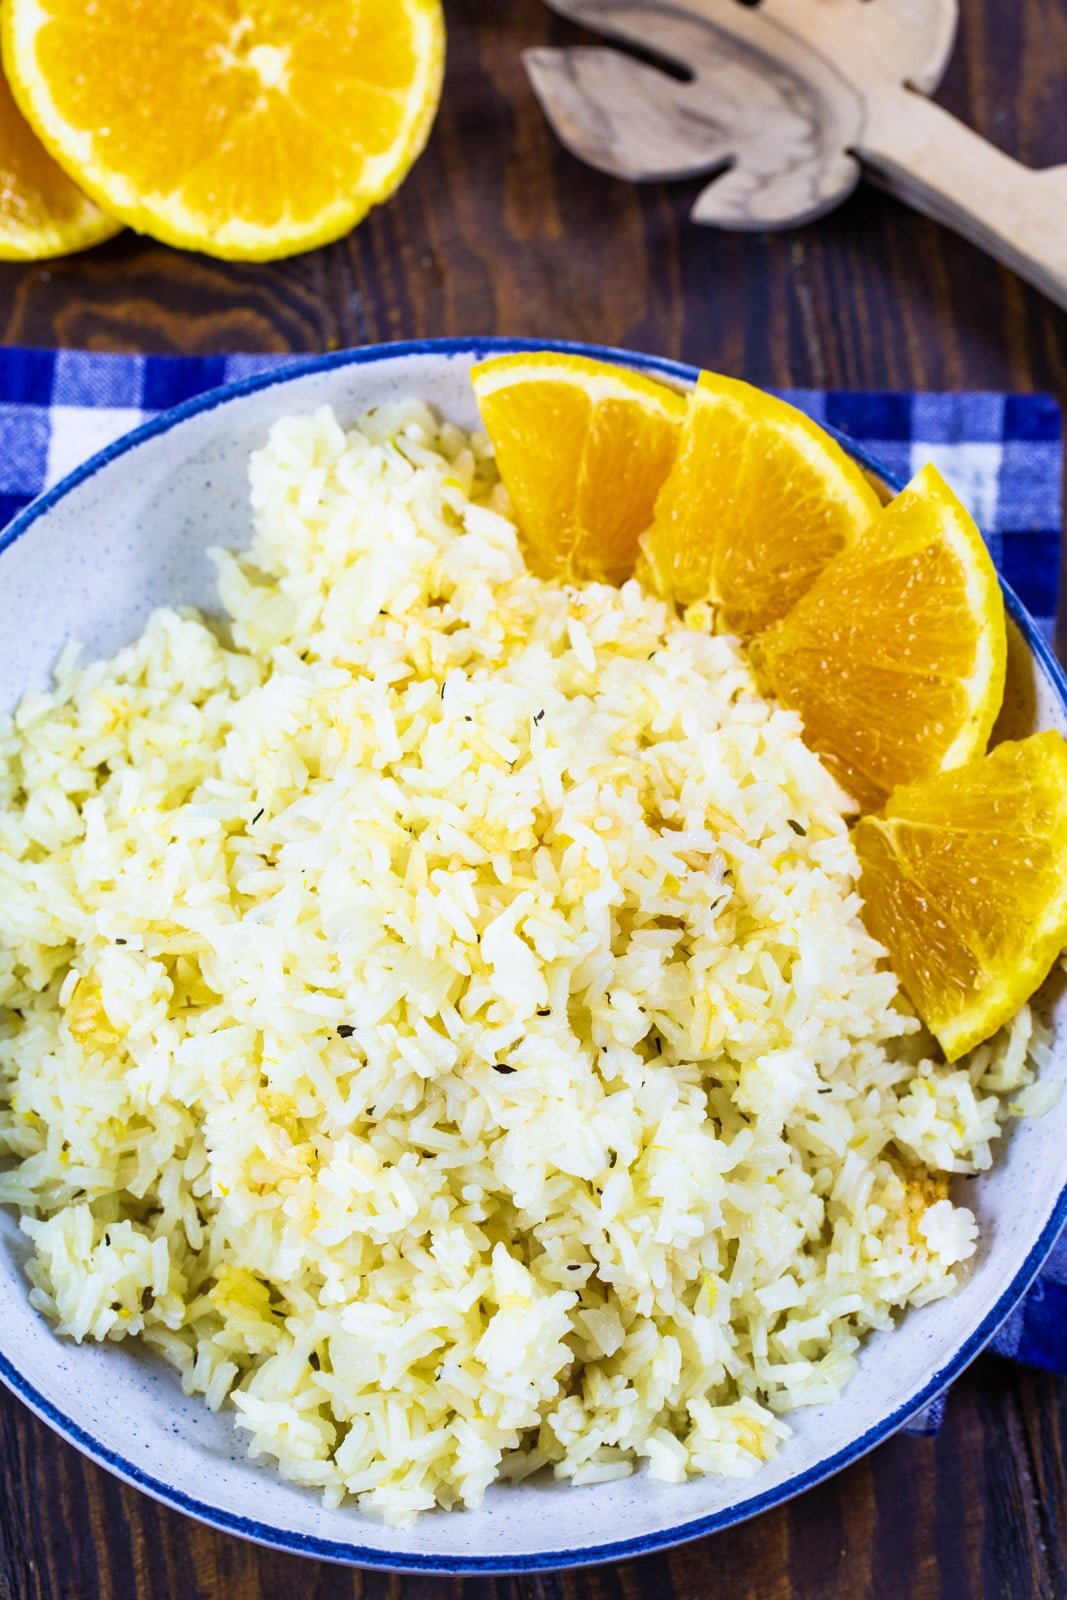 Rice in a bowl with orange slices next to it.